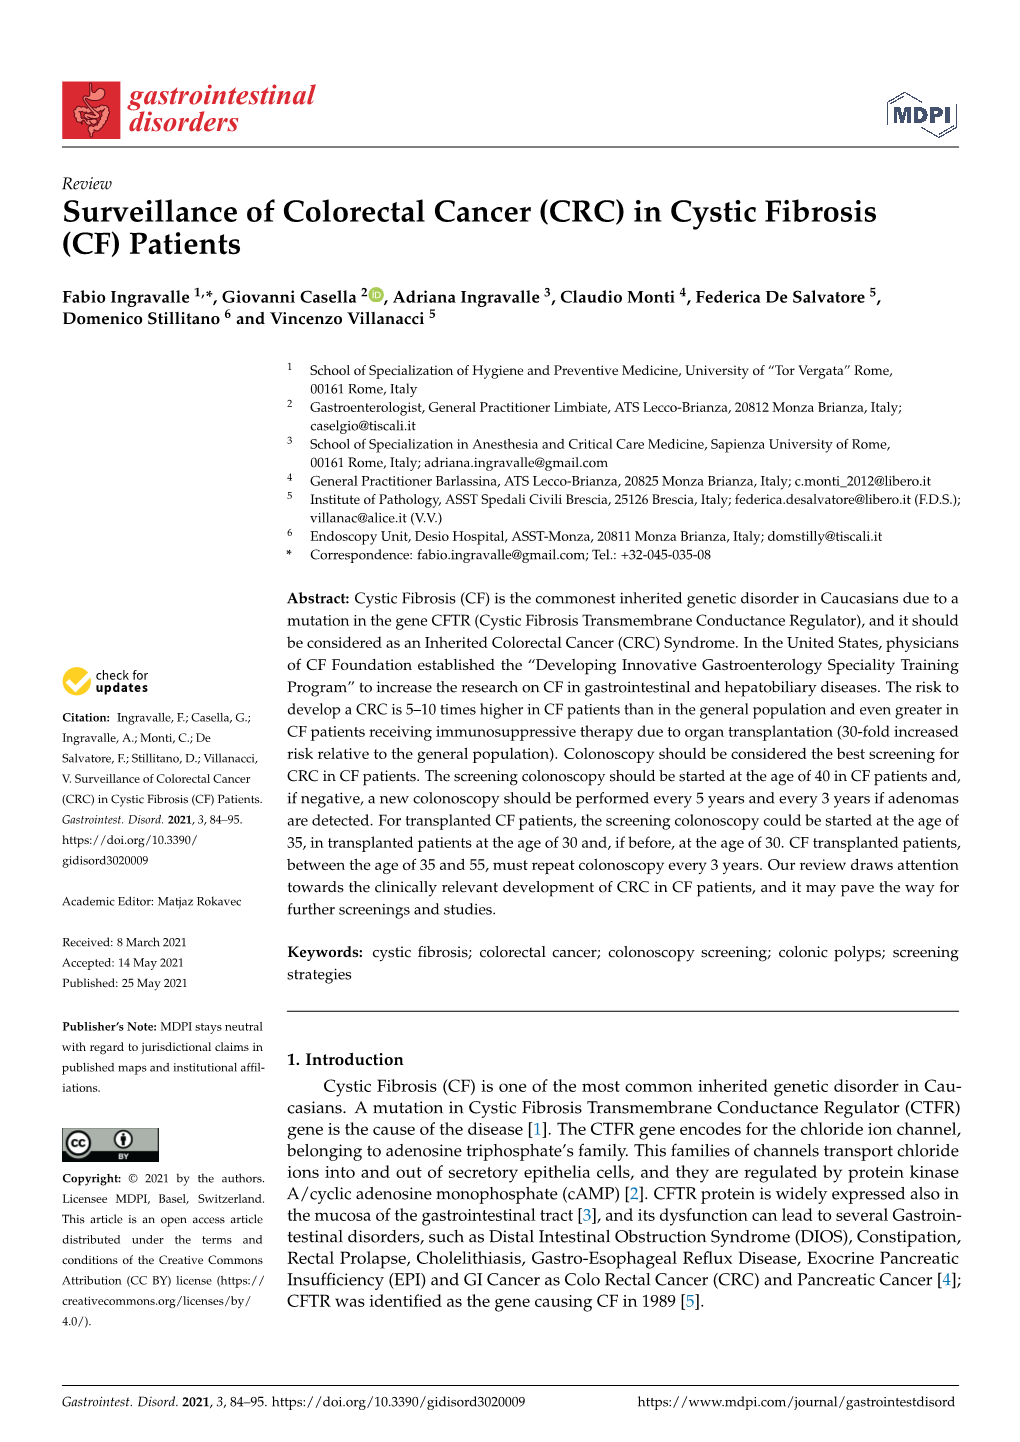 In Cystic Fibrosis (CF) Patients